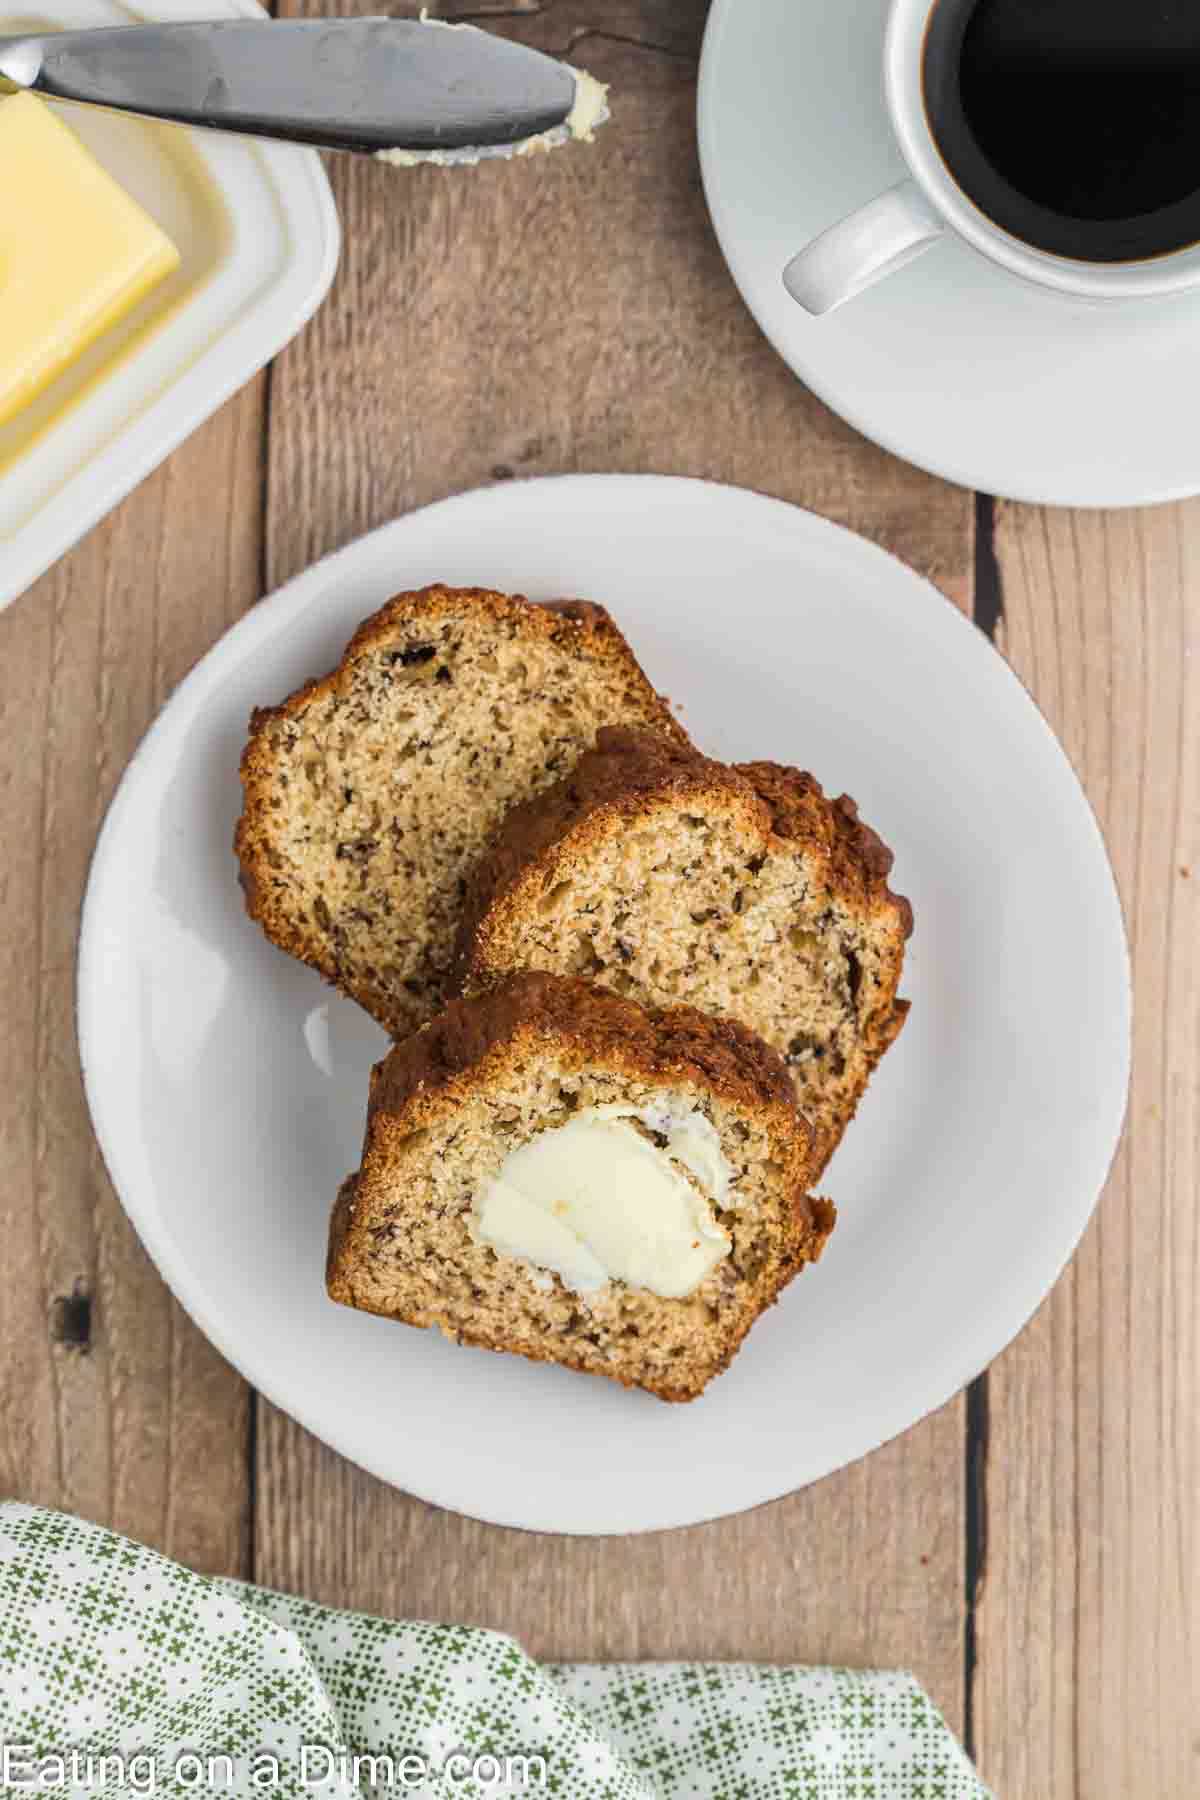 Slices of banana bread on a plate